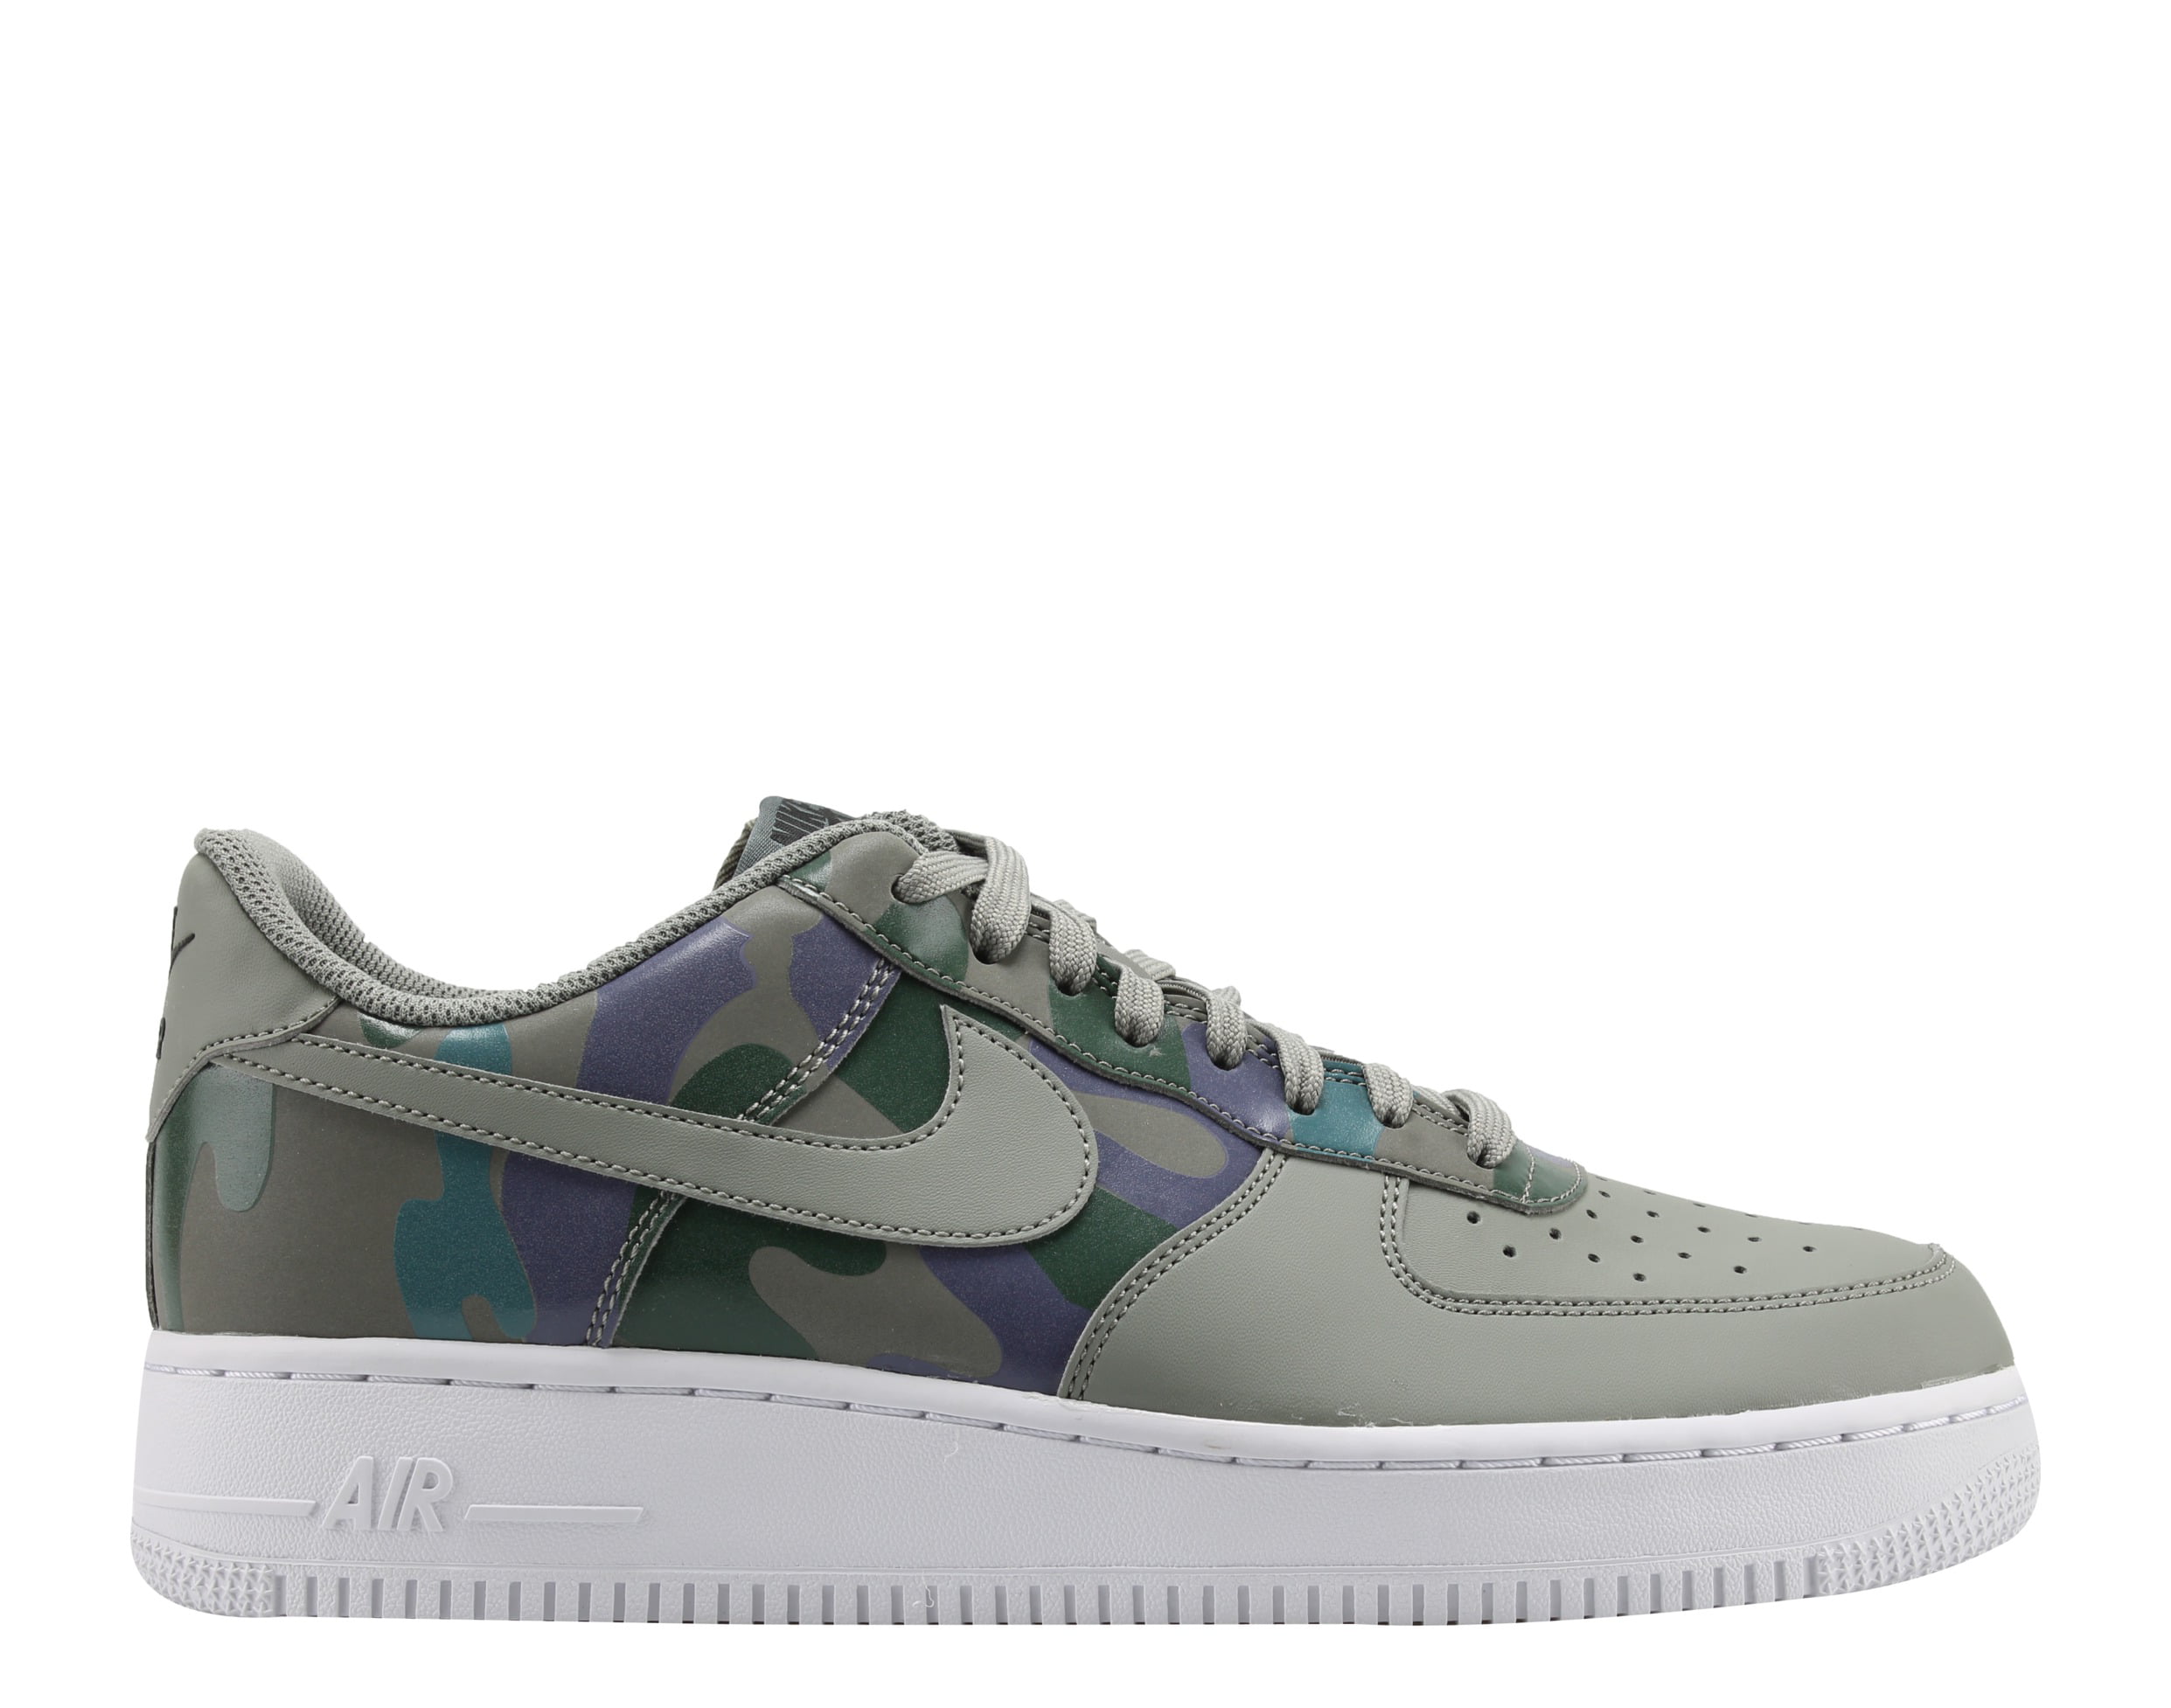 Nike AIR Force 1 LV8 UV (GS) Boys Basketball-Shoes AO2286-700_6Y - Volt/Volt-White-White  : Buy Online at Best Price in KSA - Souq is now : Fashion